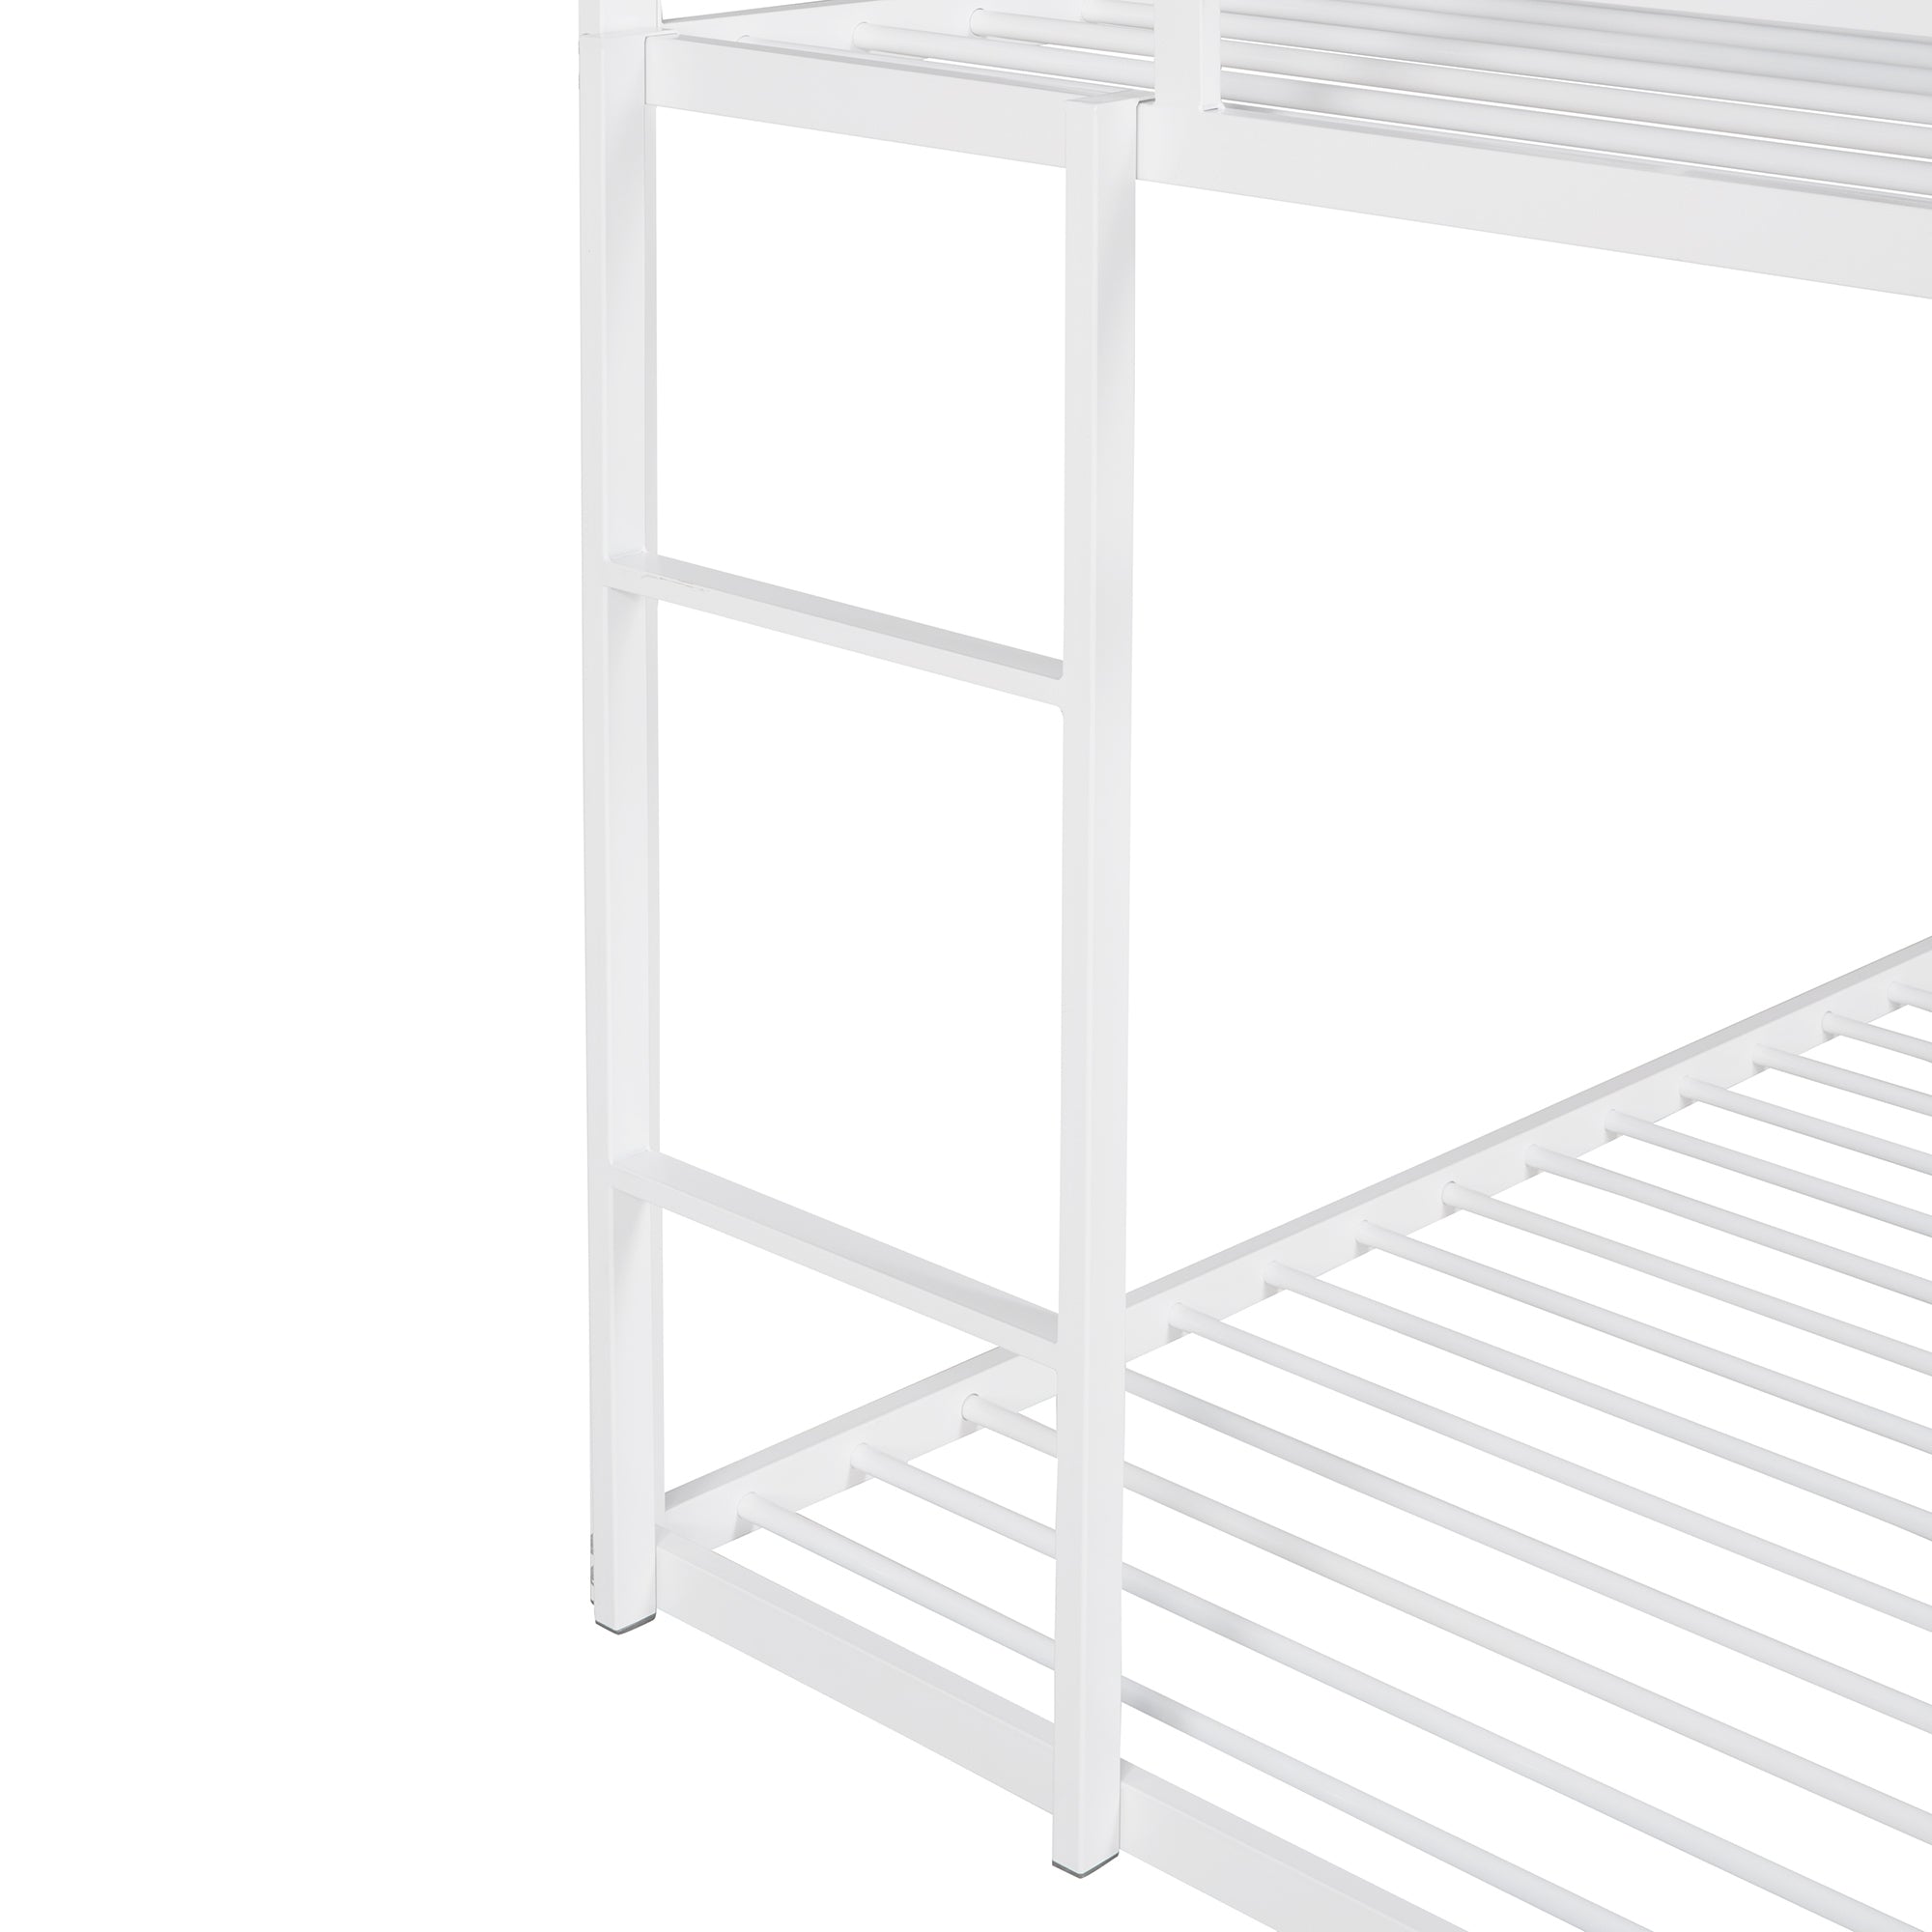 Bunk Beds for Kids Twin over Twin,House Bunk Bed Metal white-metal